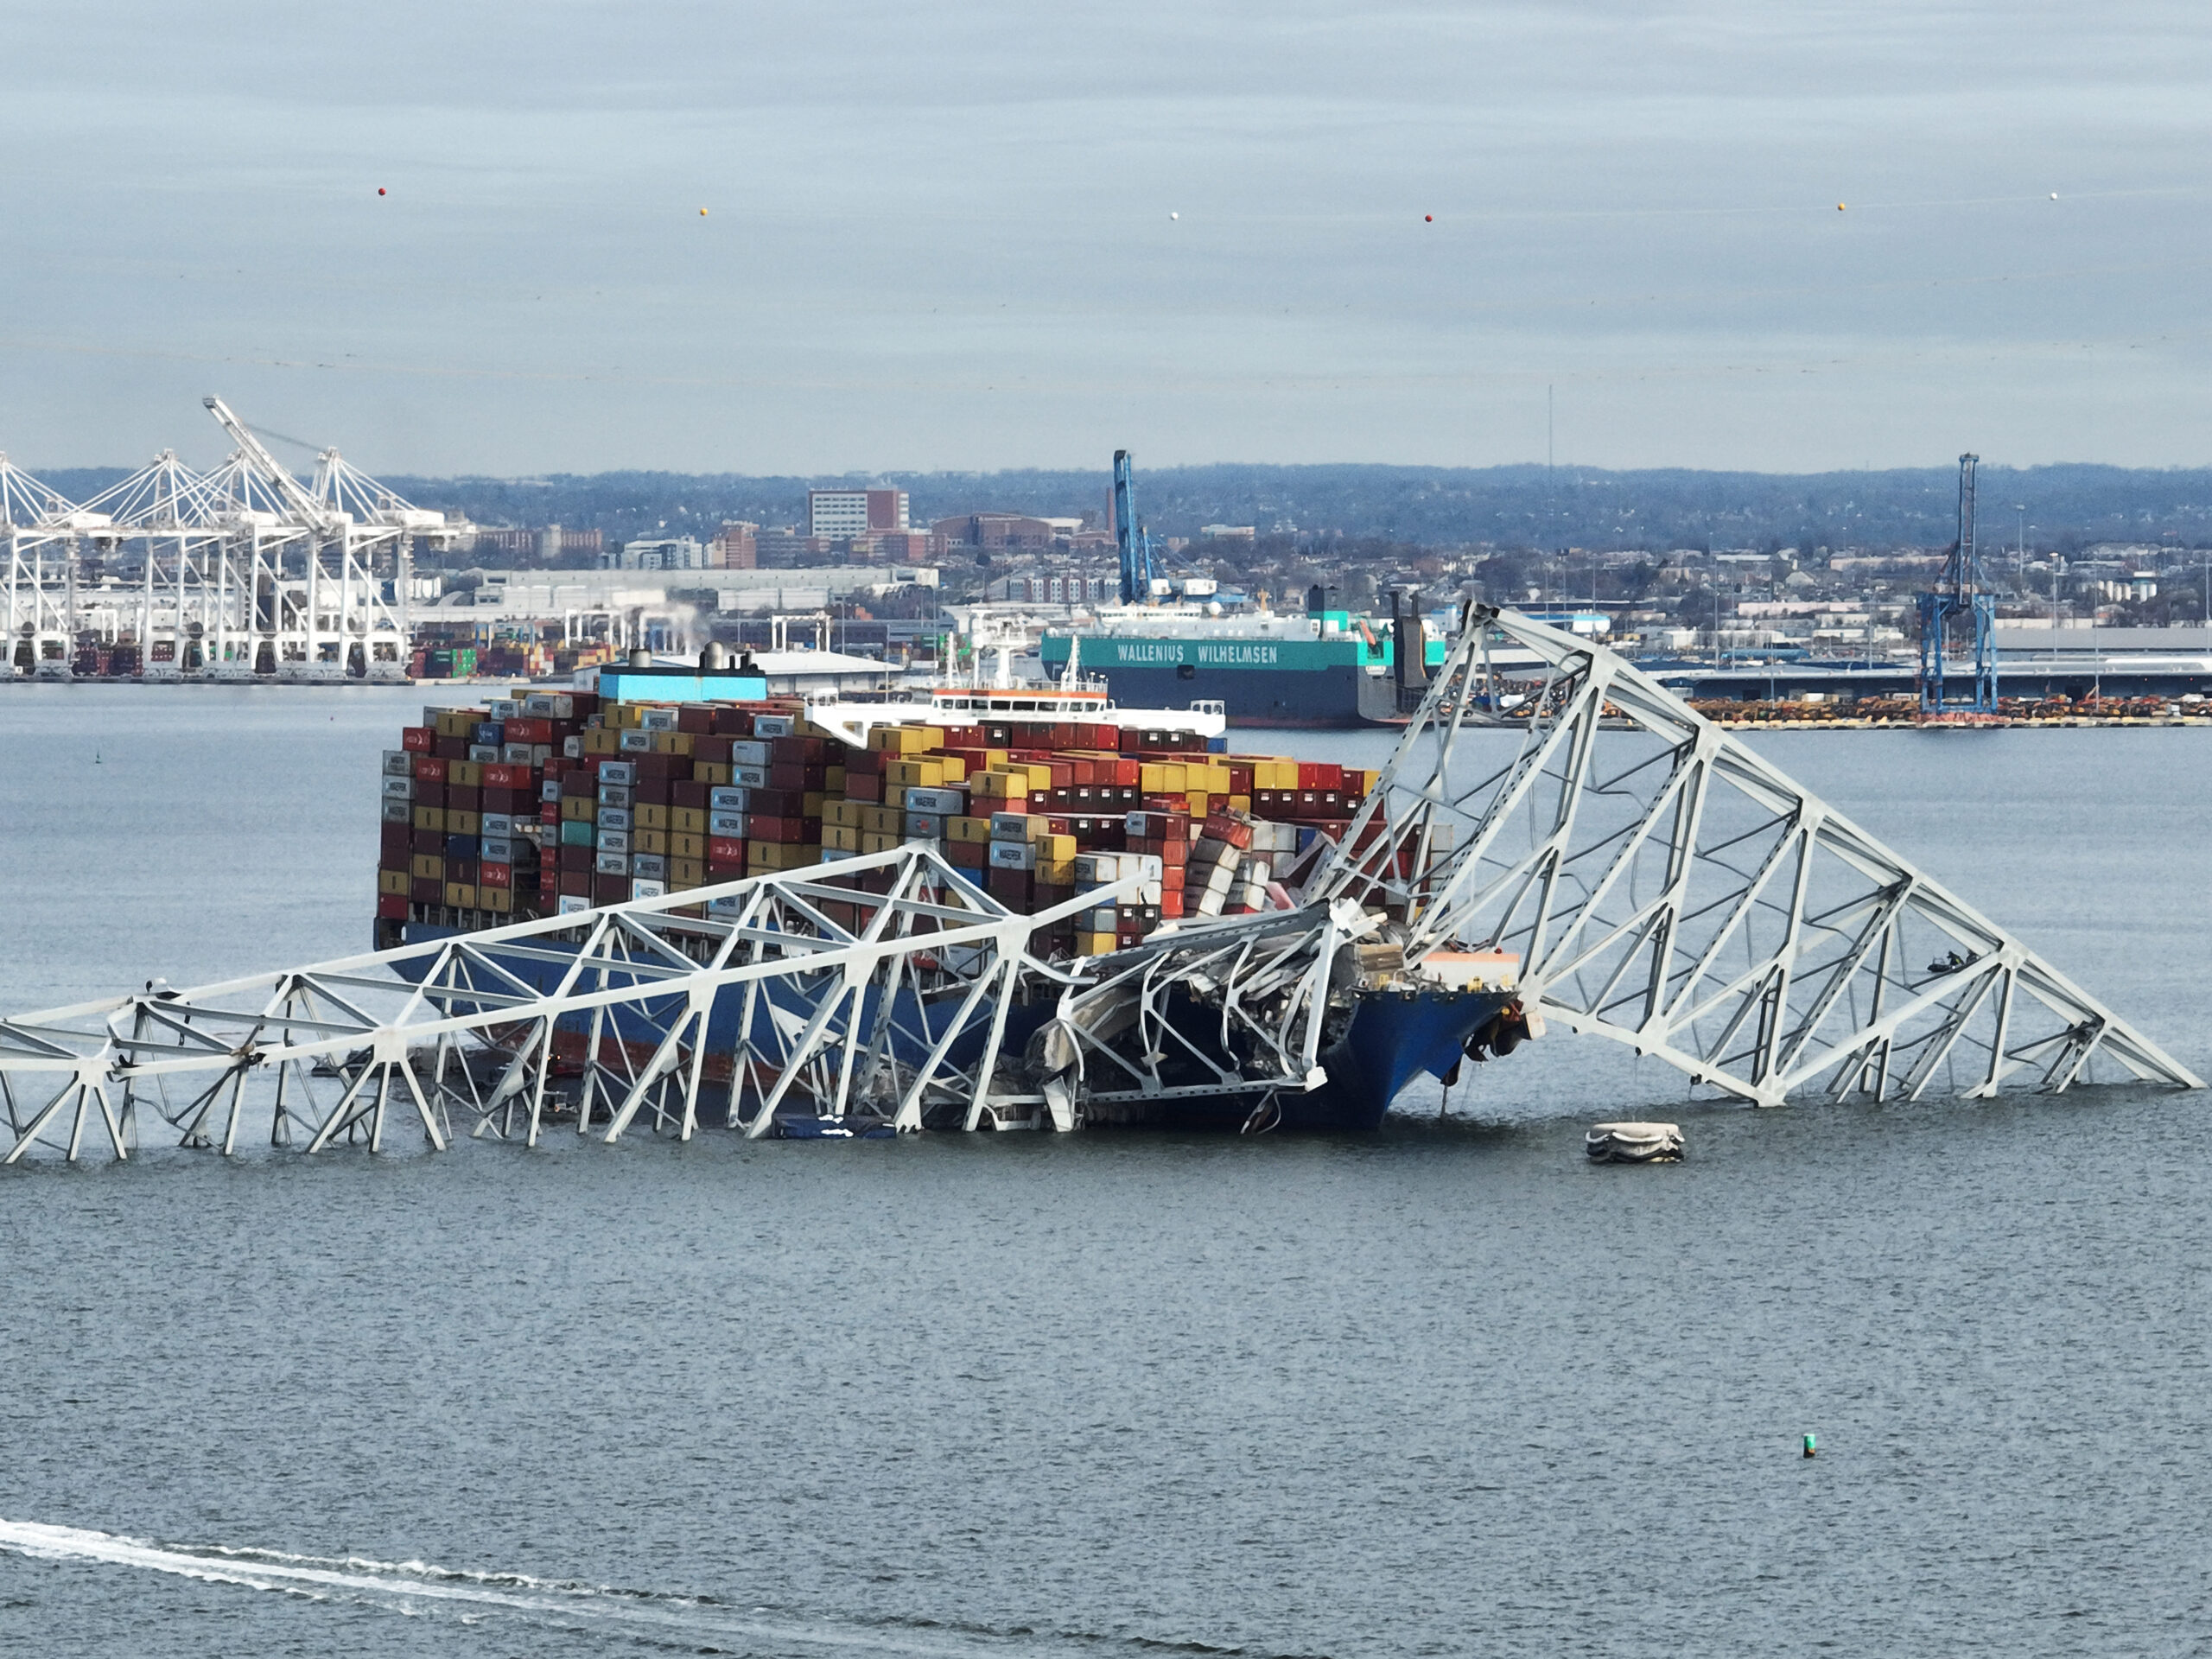 A steel frame from the collapsed Francis Scott Key bridge in Baltimore covers the top of the Dali ship. The container ship crashed into the bridge on Tuesday.